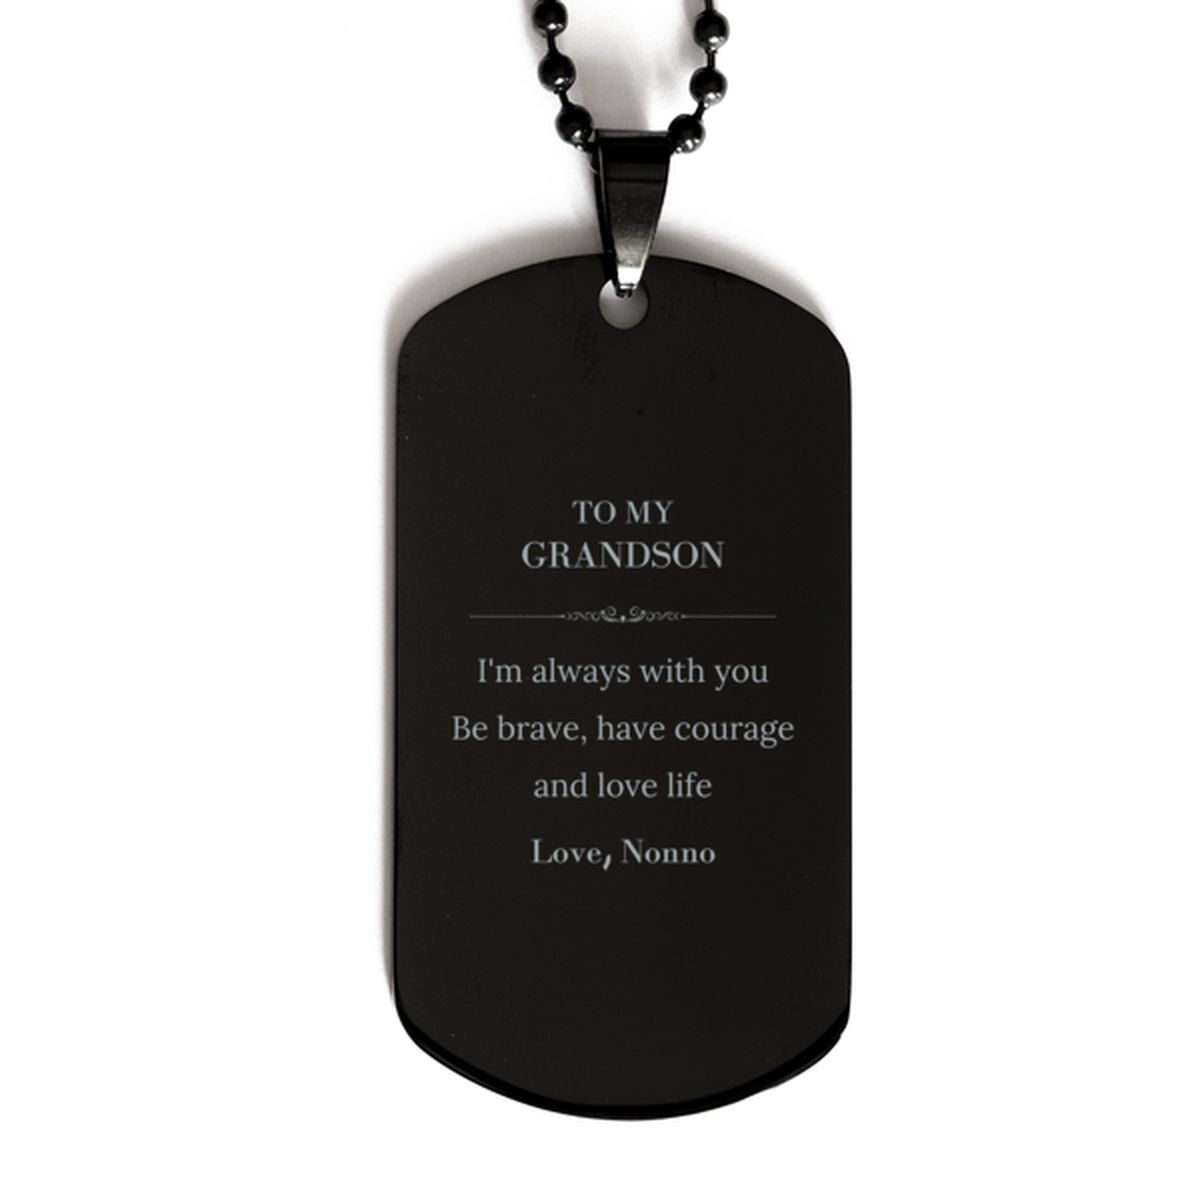 To My Grandson Gifts from Nonno, Unique Black Dog Tag Inspirational Christmas Birthday Graduation Gifts for Grandson I'm always with you. Be brave, have courage and love life. Love, Nonno